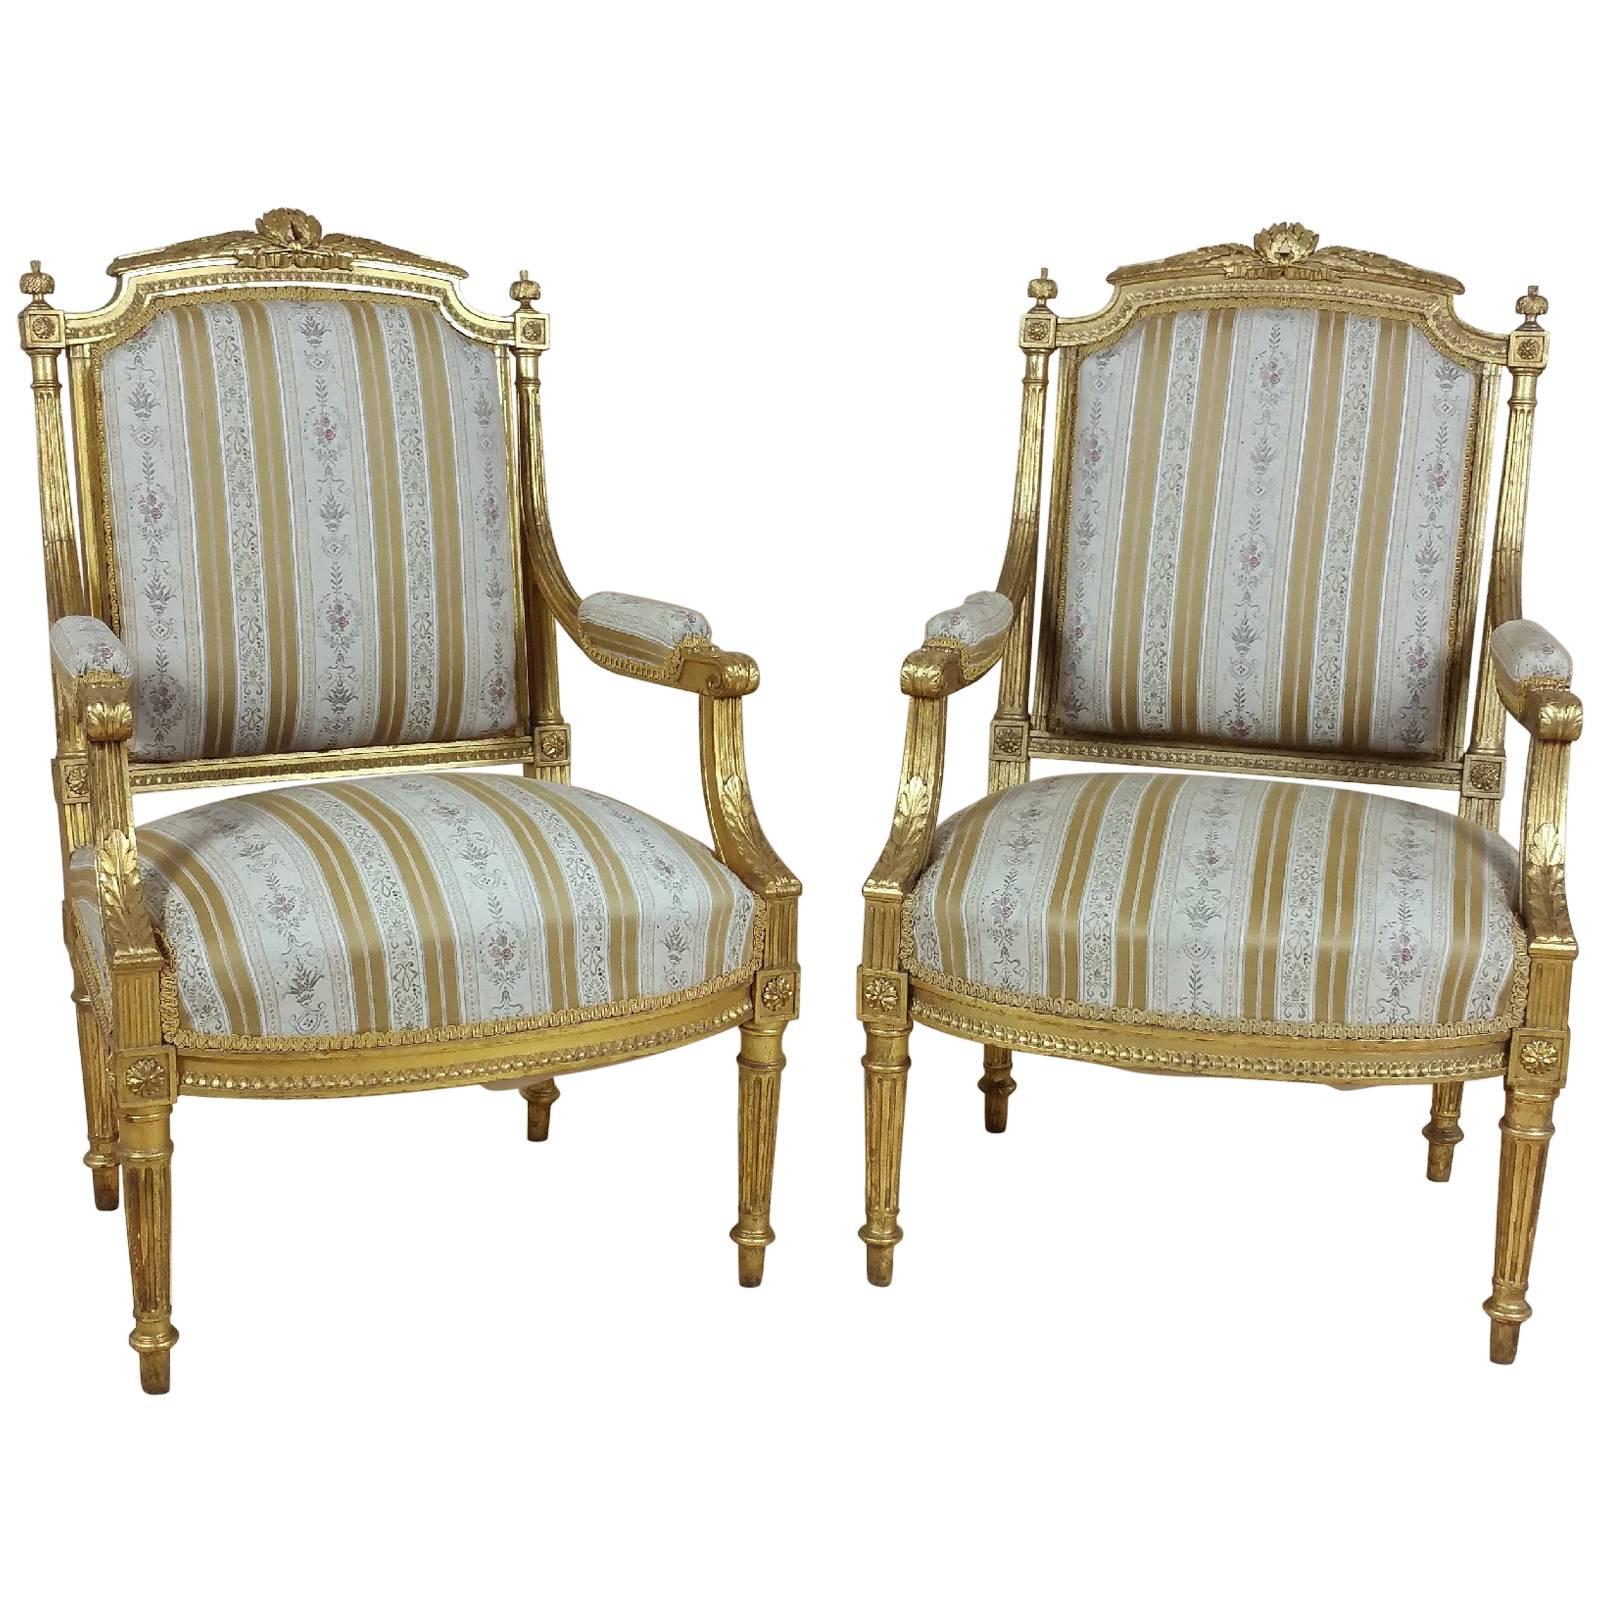 Fine Pair of 19th Century French Carved Giltwood Fauteuils